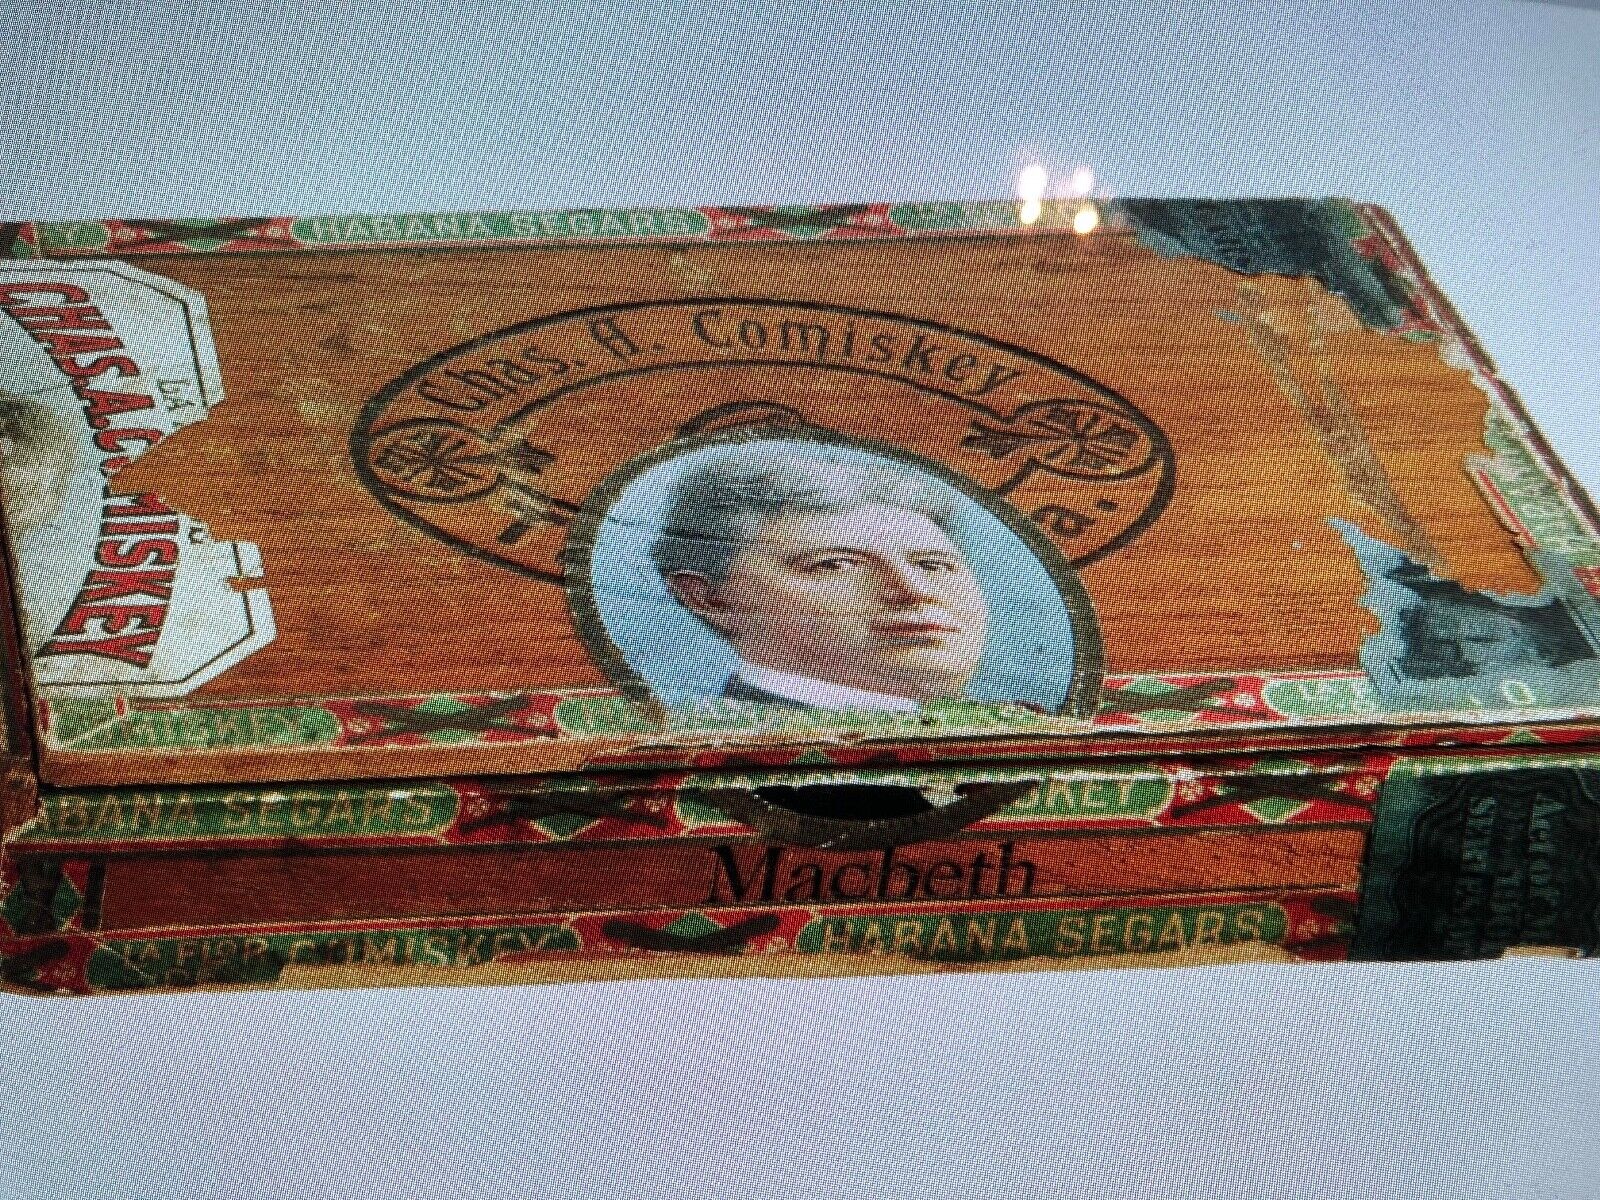  RARE Charles Comiskey 1900'S CIGAR BAND FROM HIS PIVATE BRAND